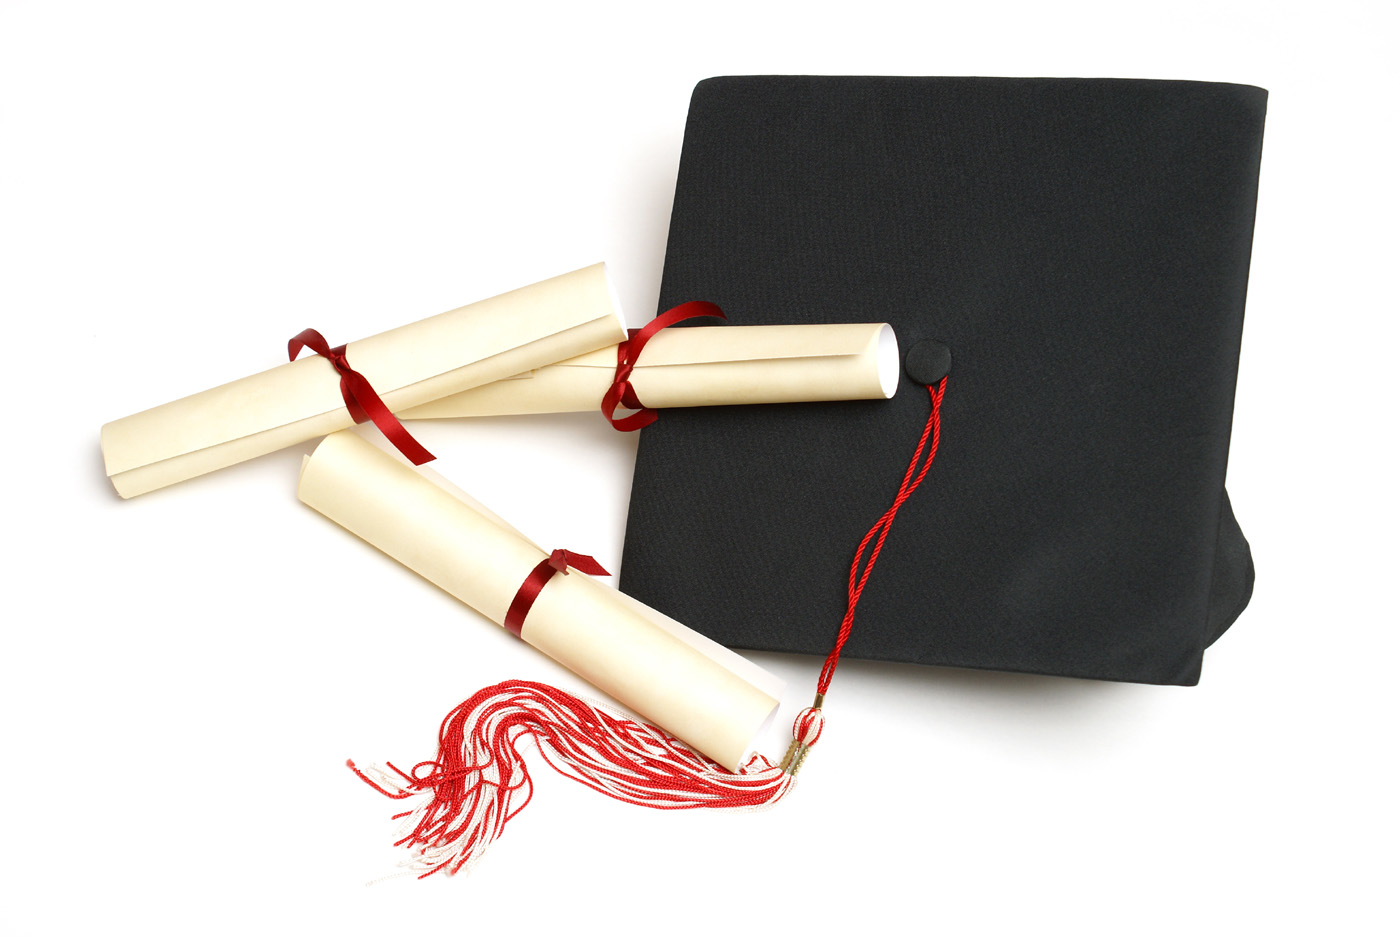 The Advantages and Disadvantages of Fake Diplomas and Degrees